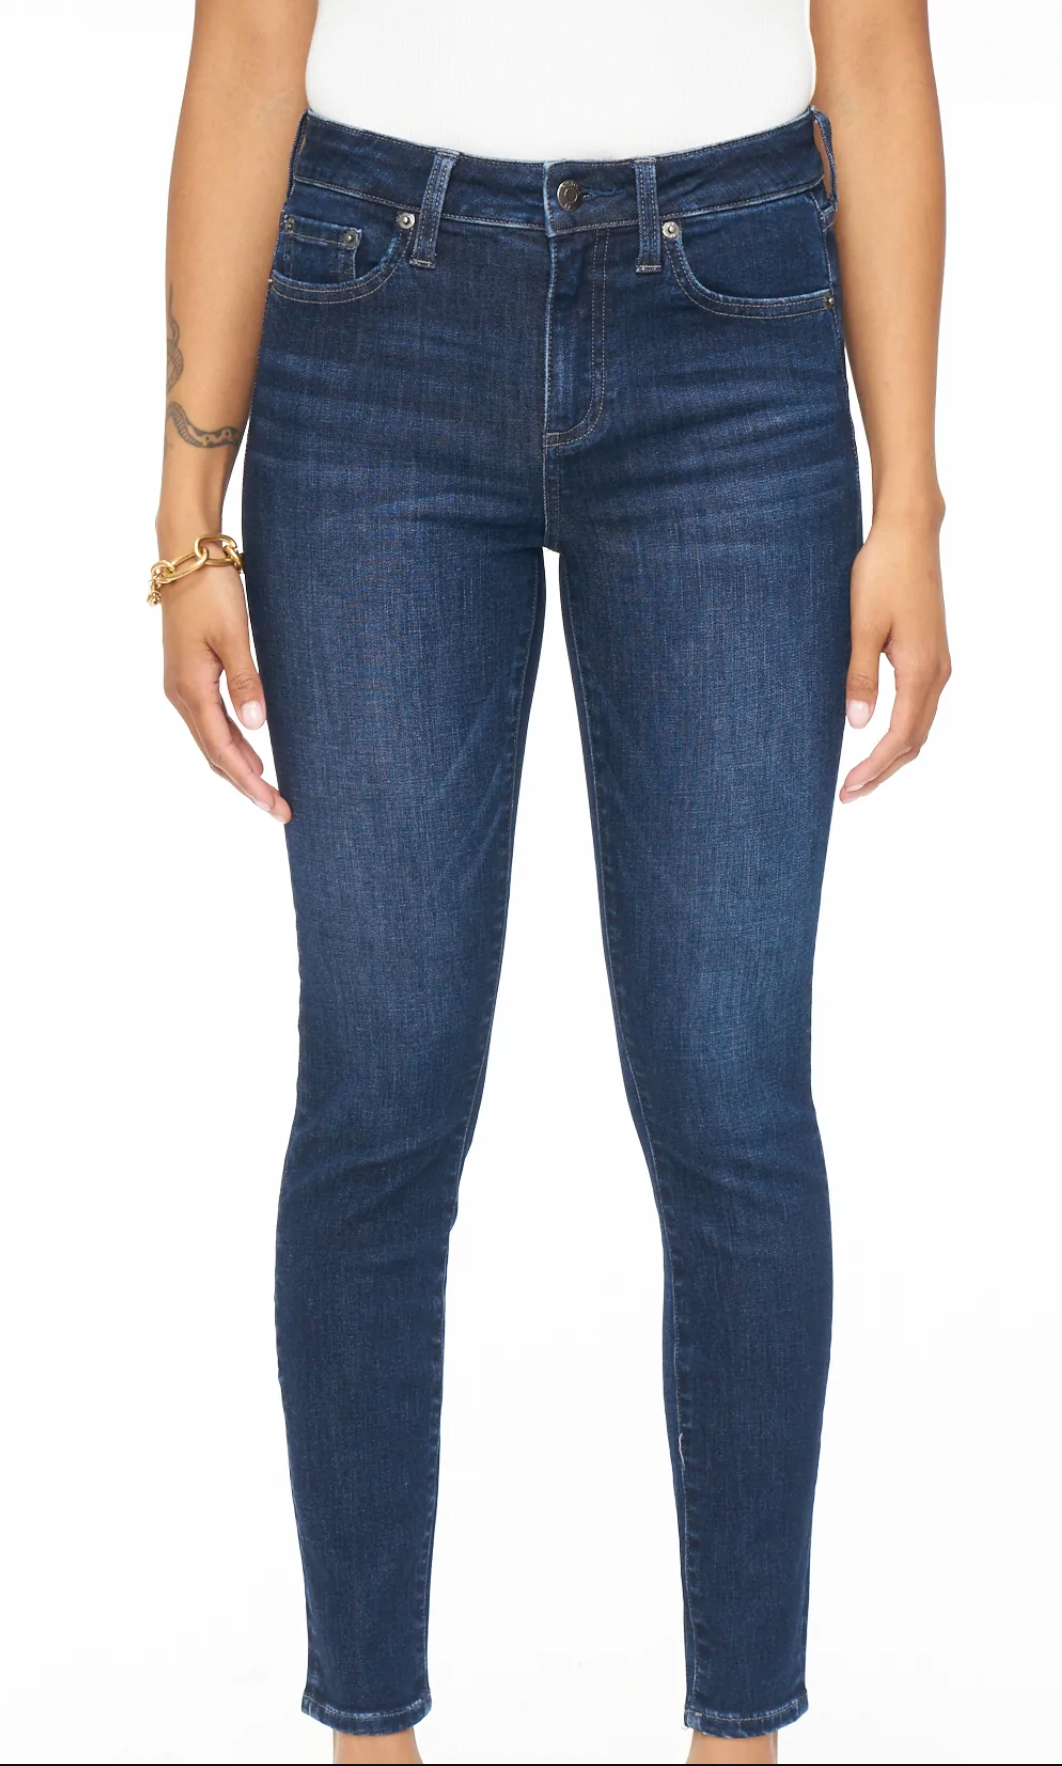 Pistola Audrey Mid Rise Skinny Jeans